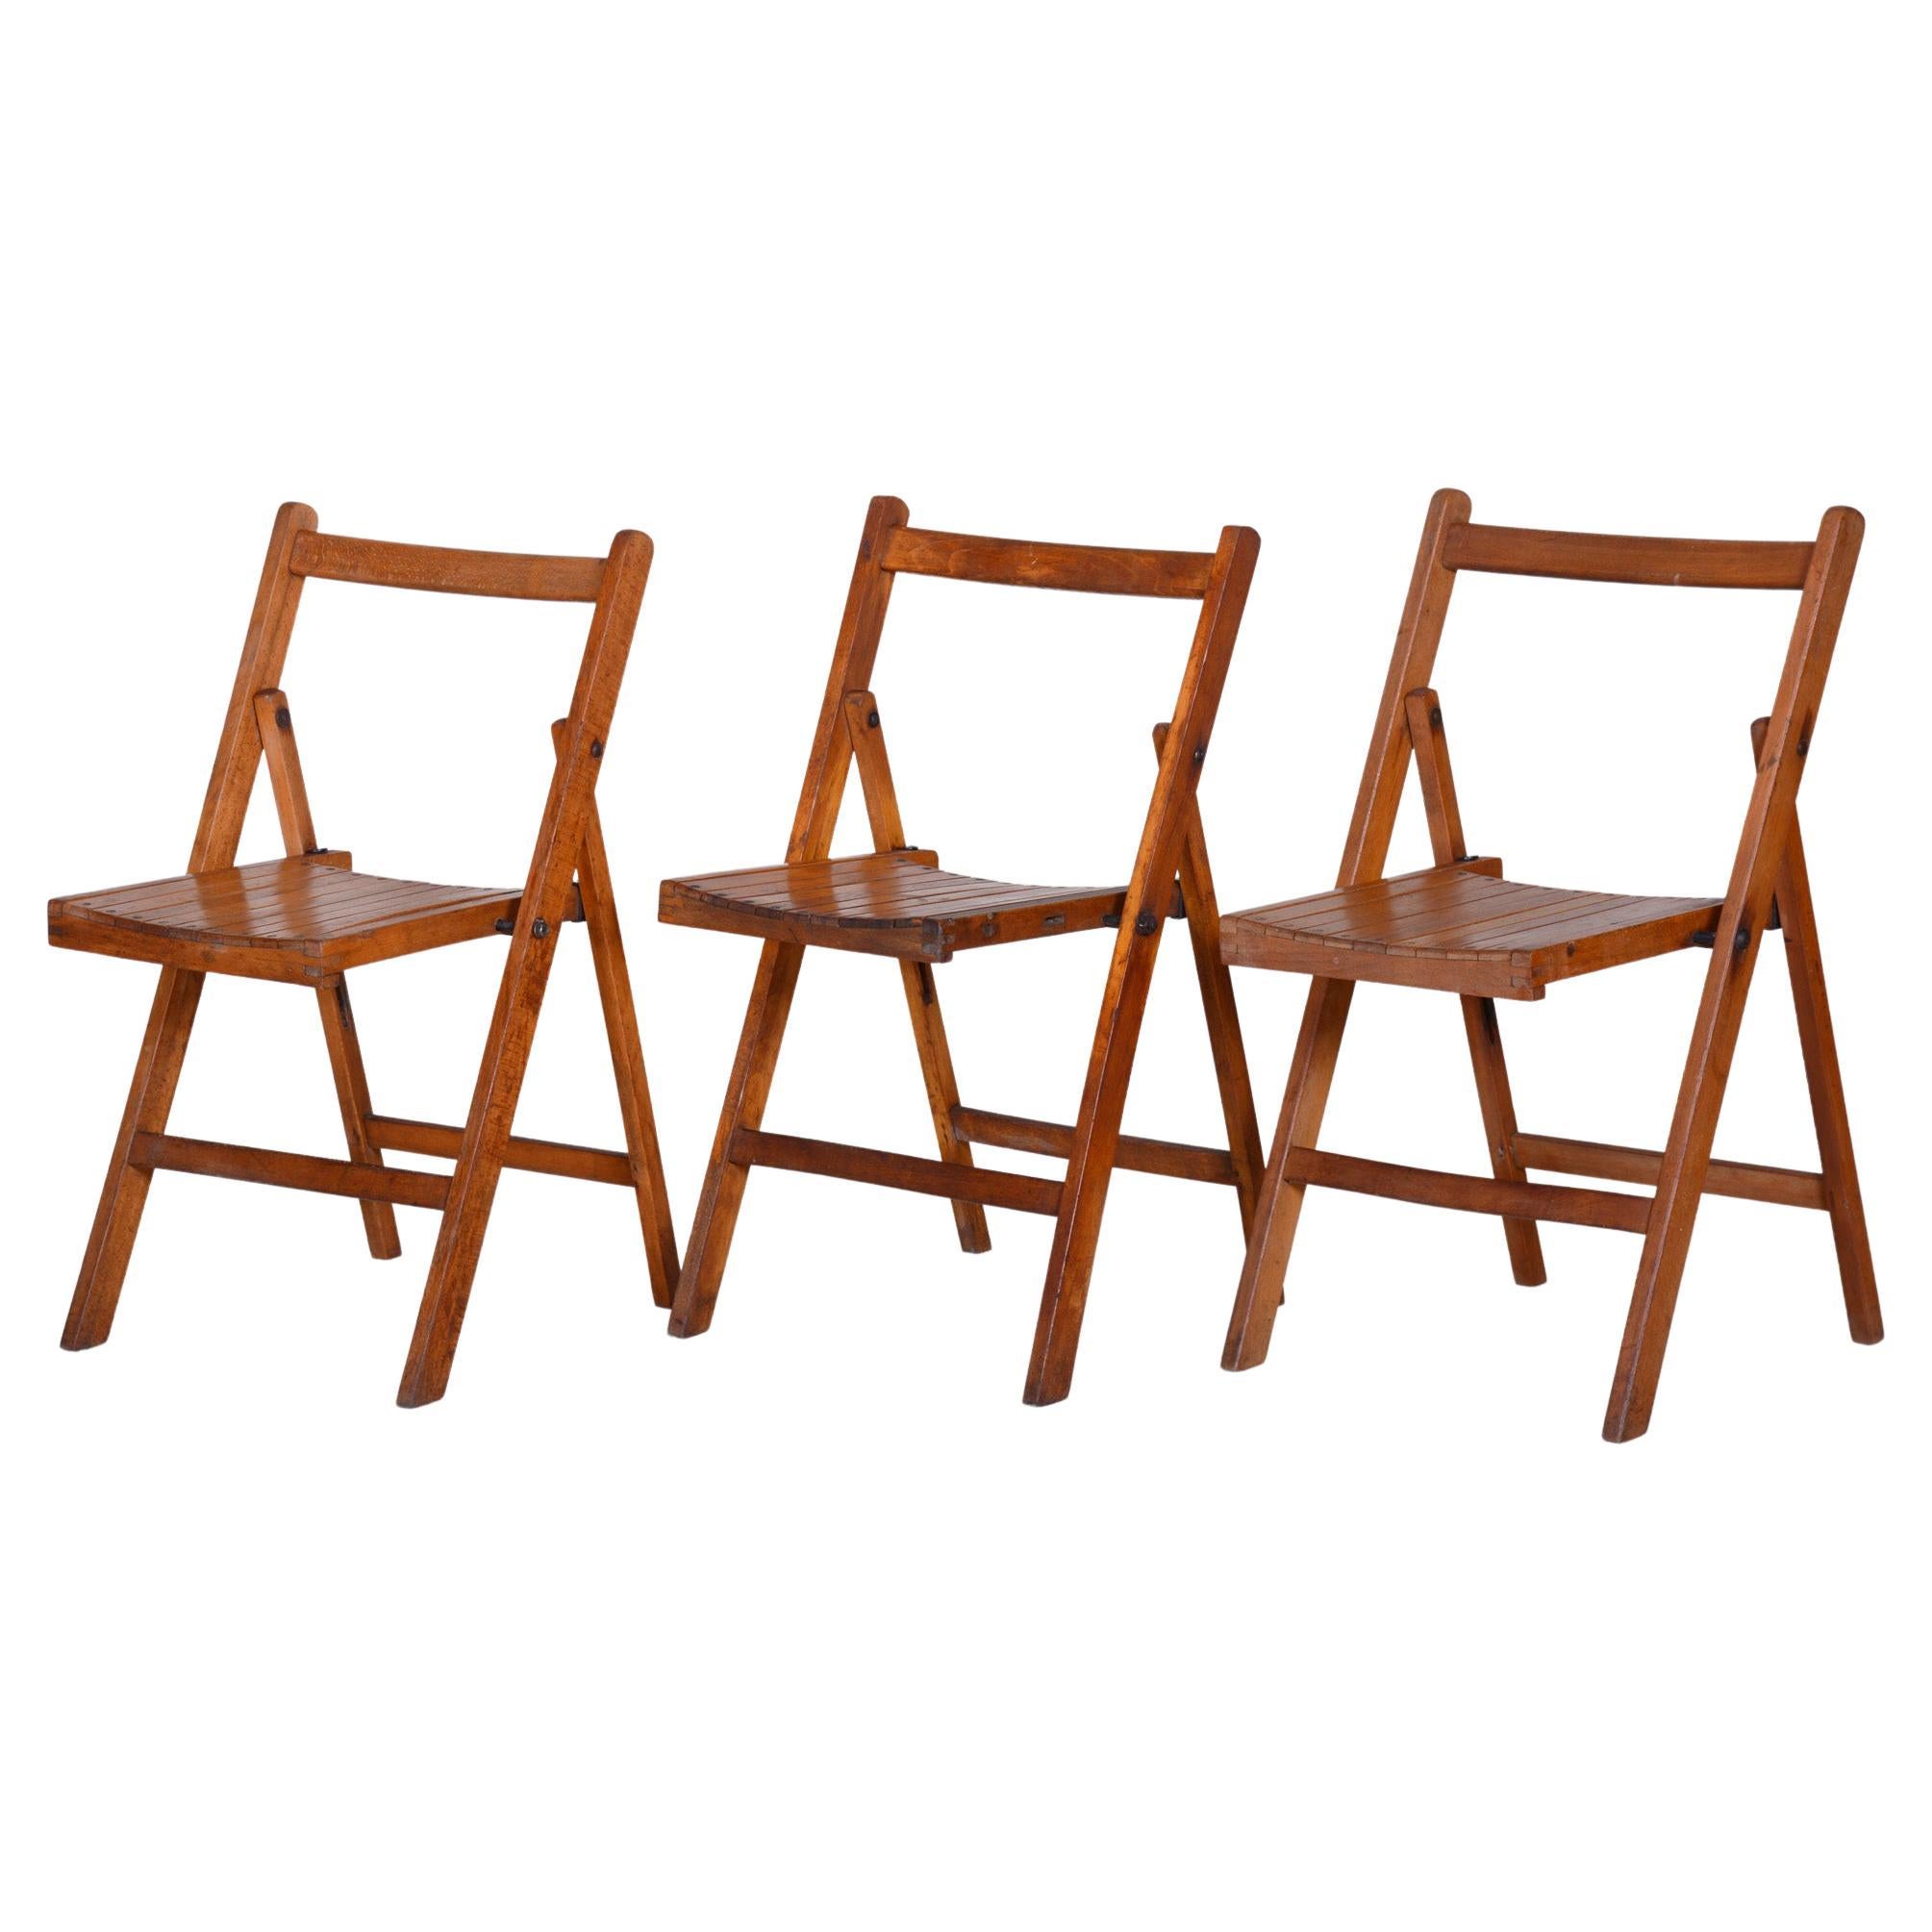 Czech Midcentury Beech Chairs, Original Condition, 1950s, 3 Pieces For Sale